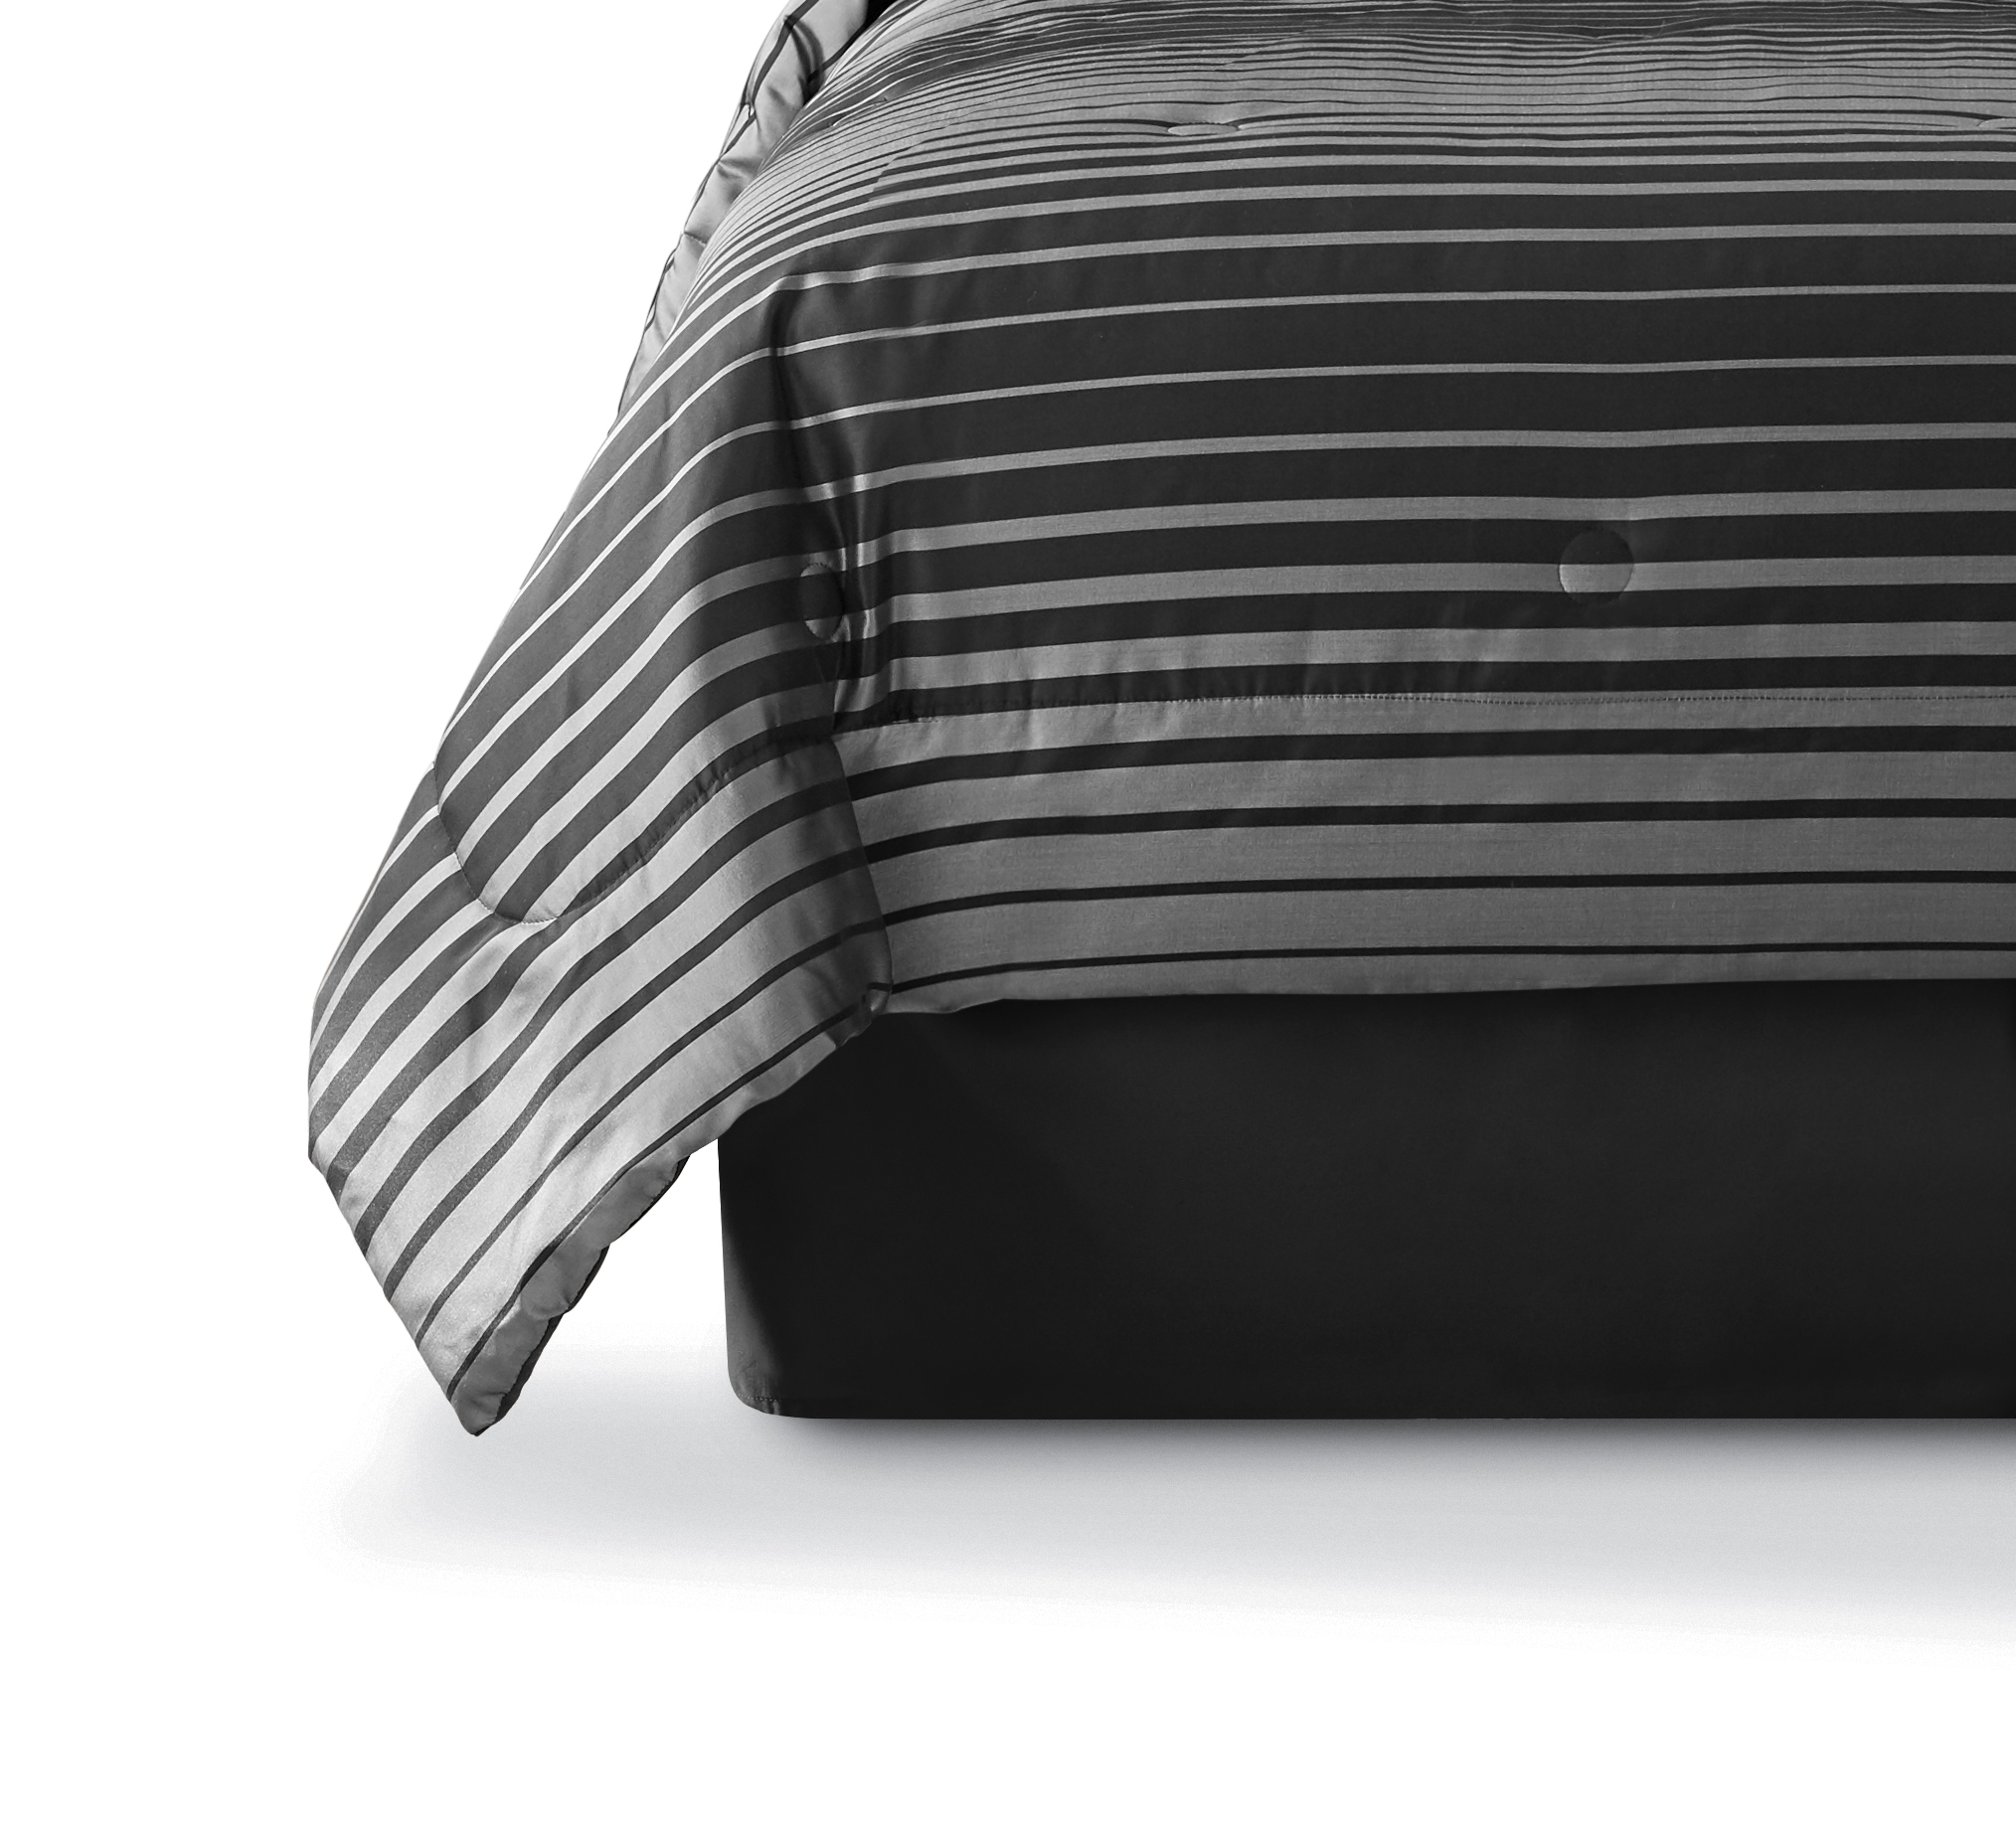 Mainstays 7-Piece Black Striped Midnight Woven Comforter Set, King - image 2 of 5